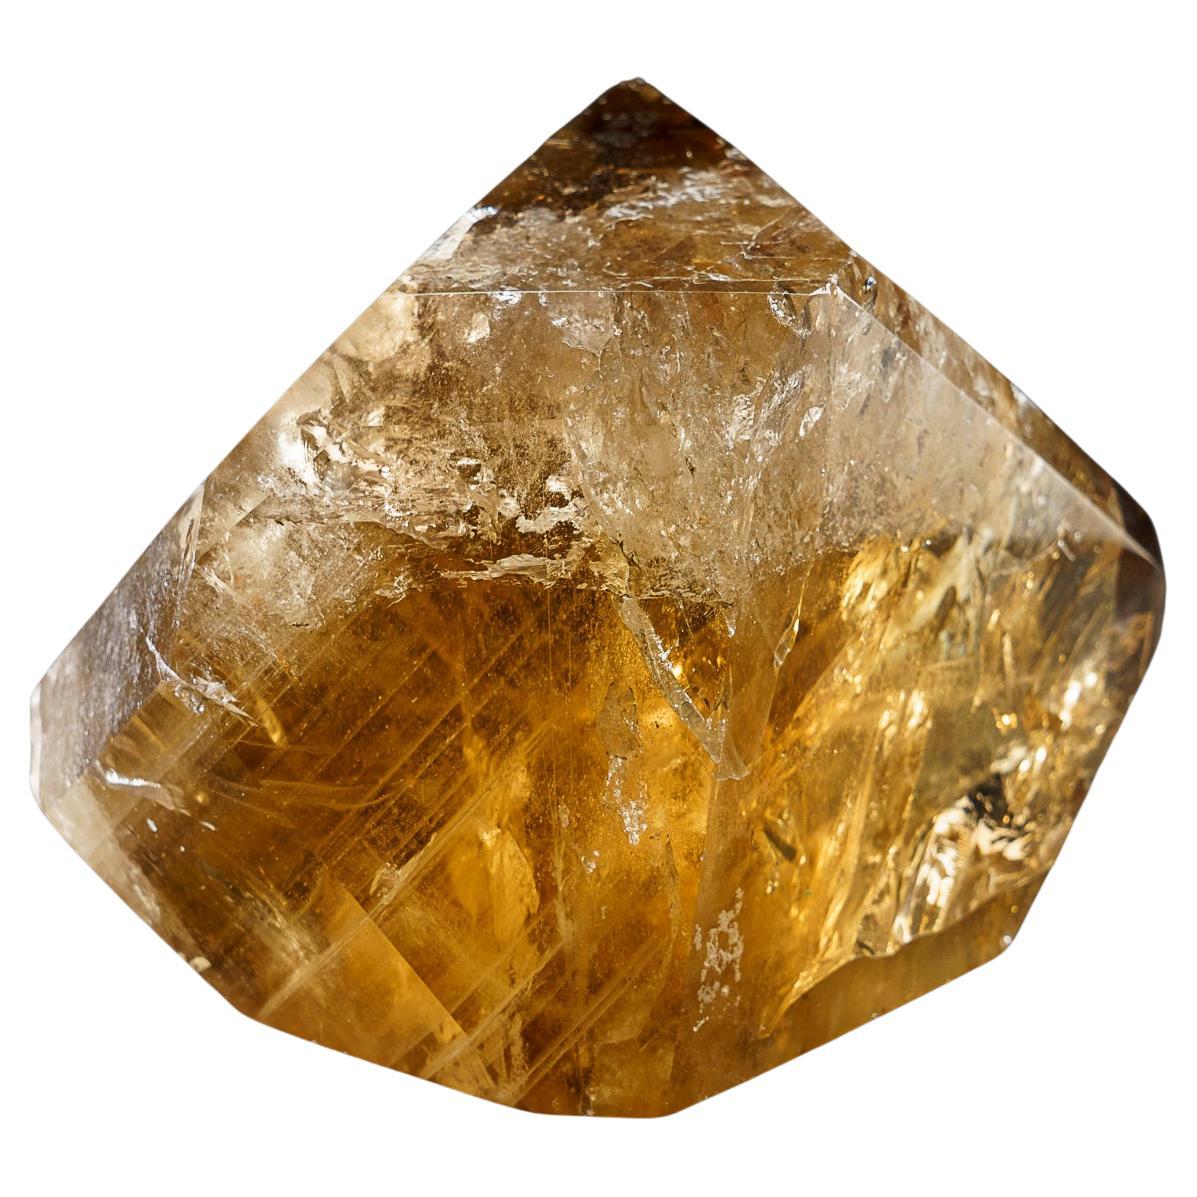 Genuine Large Smoky Quartz Crystal Point From Brazil (11 lbs) For Sale